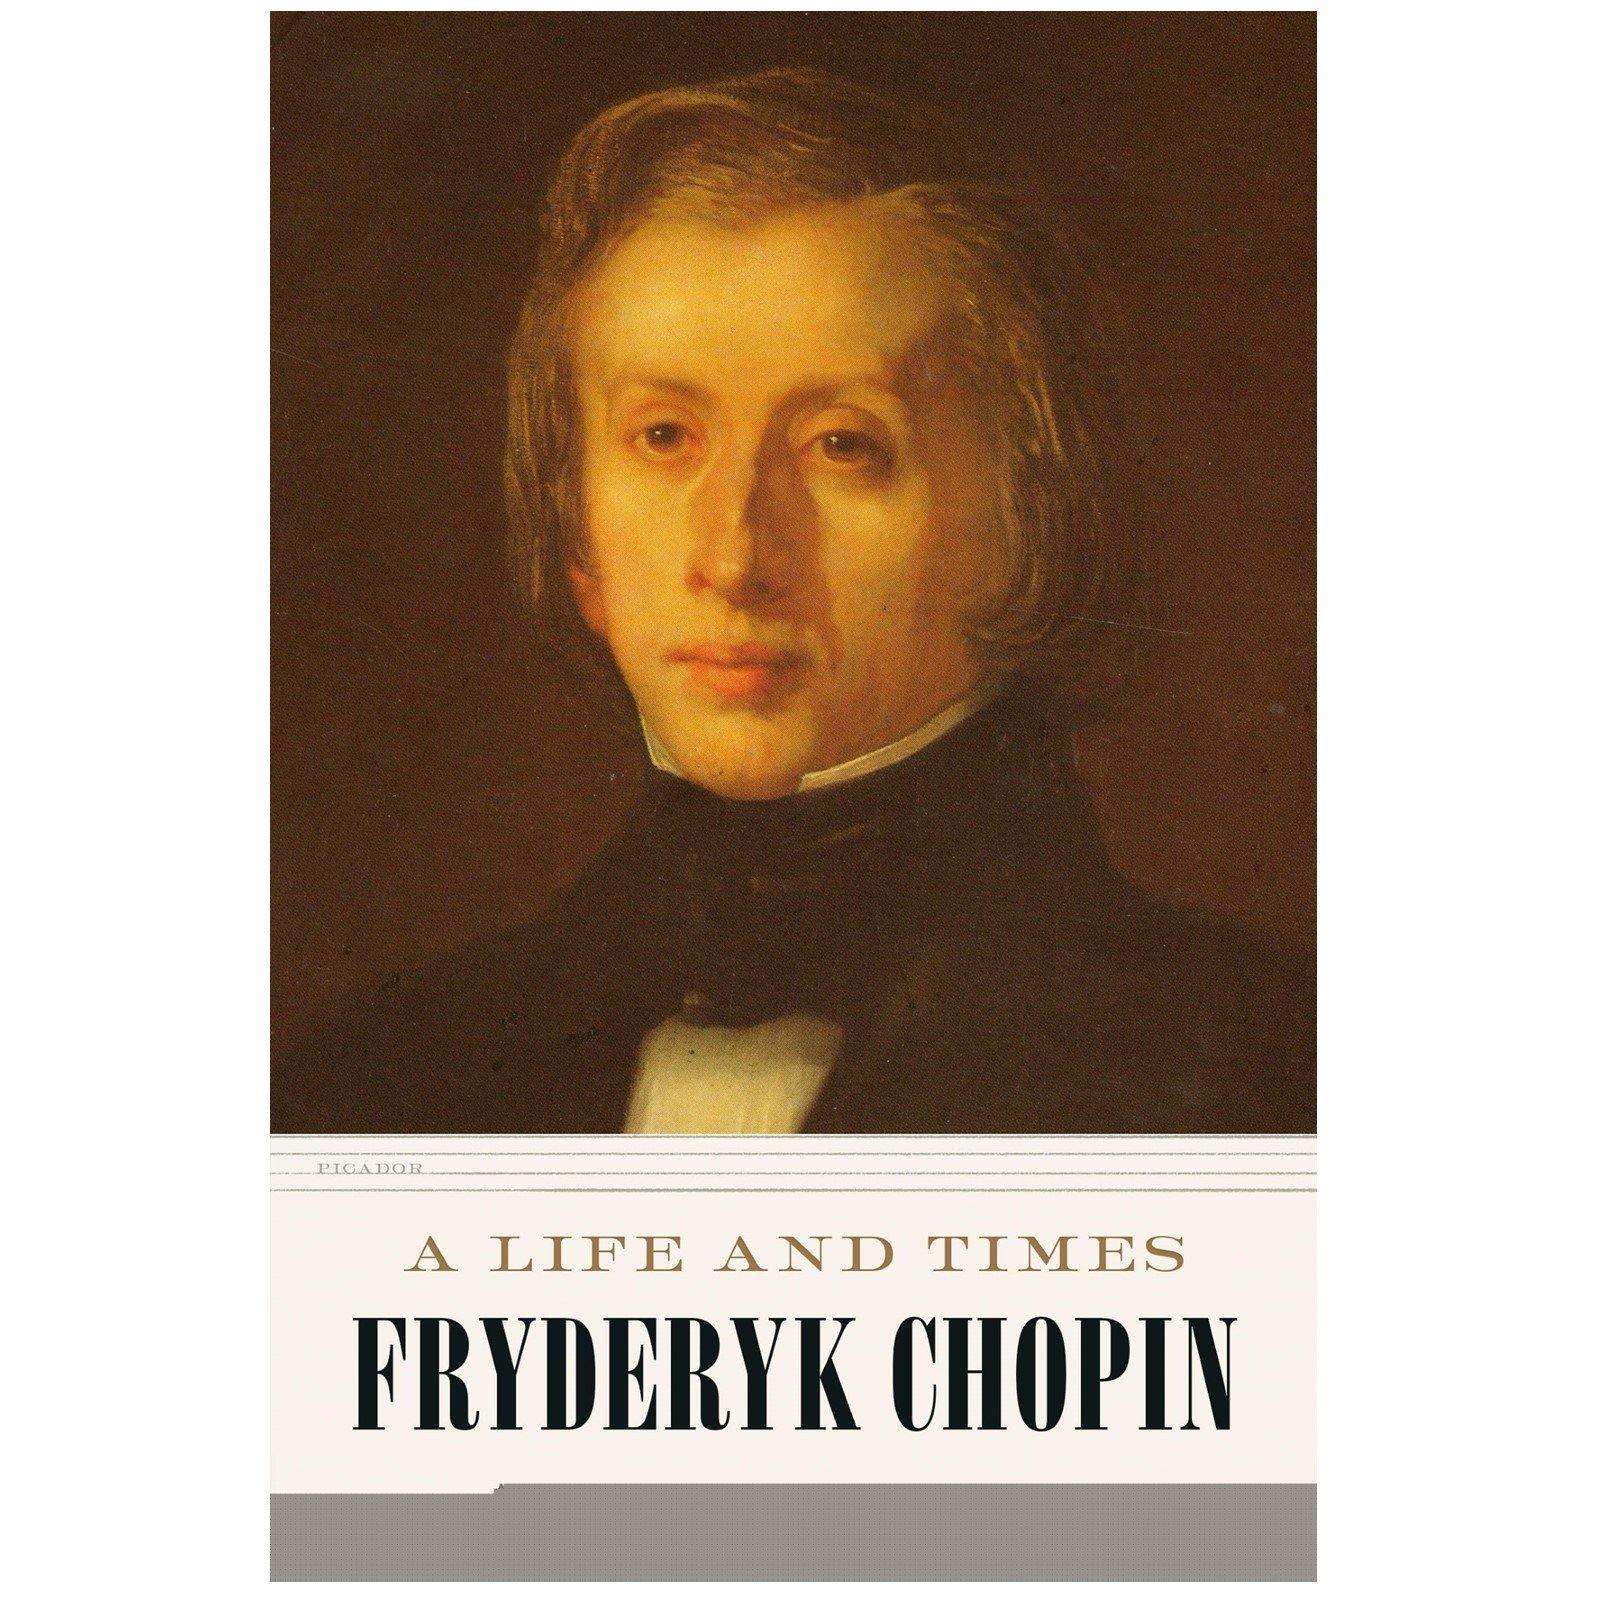 A Life and Times: Fryderyk Chopin - Library of Congress Shop